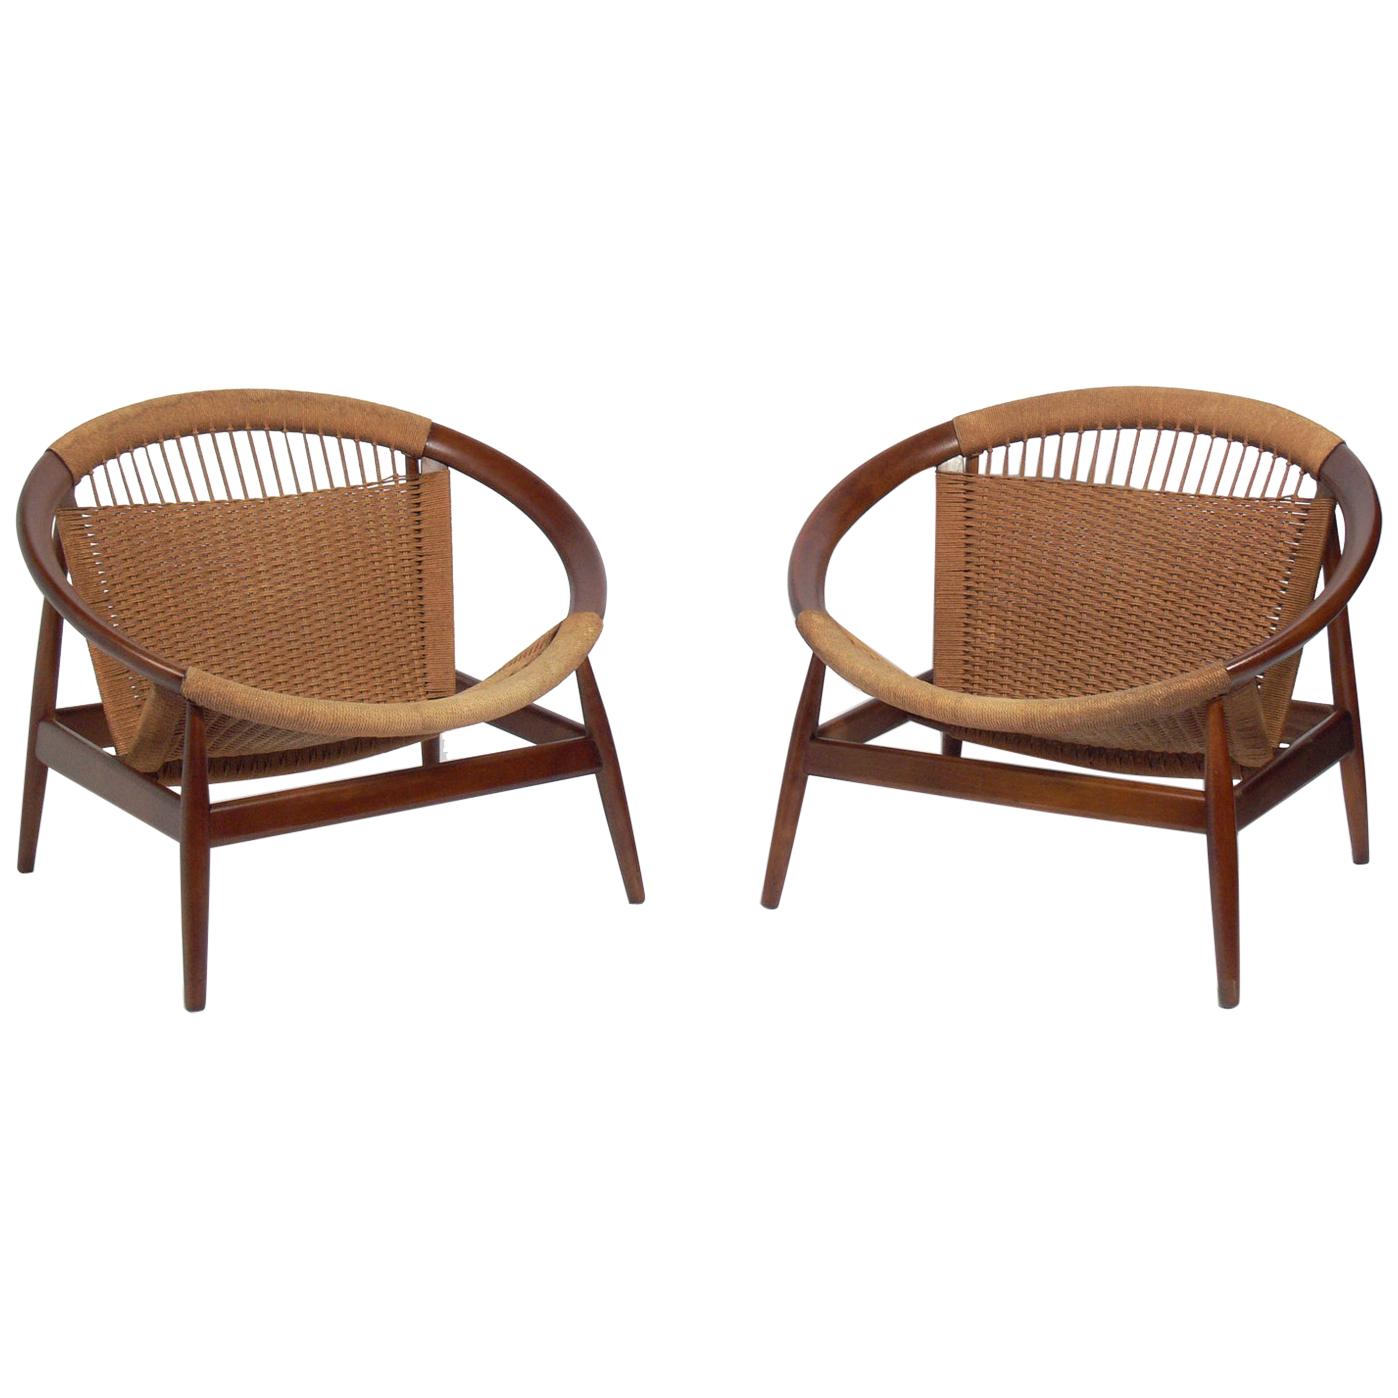 Danish Modern Hoop Lounge Chairs by Illum Wikkelso